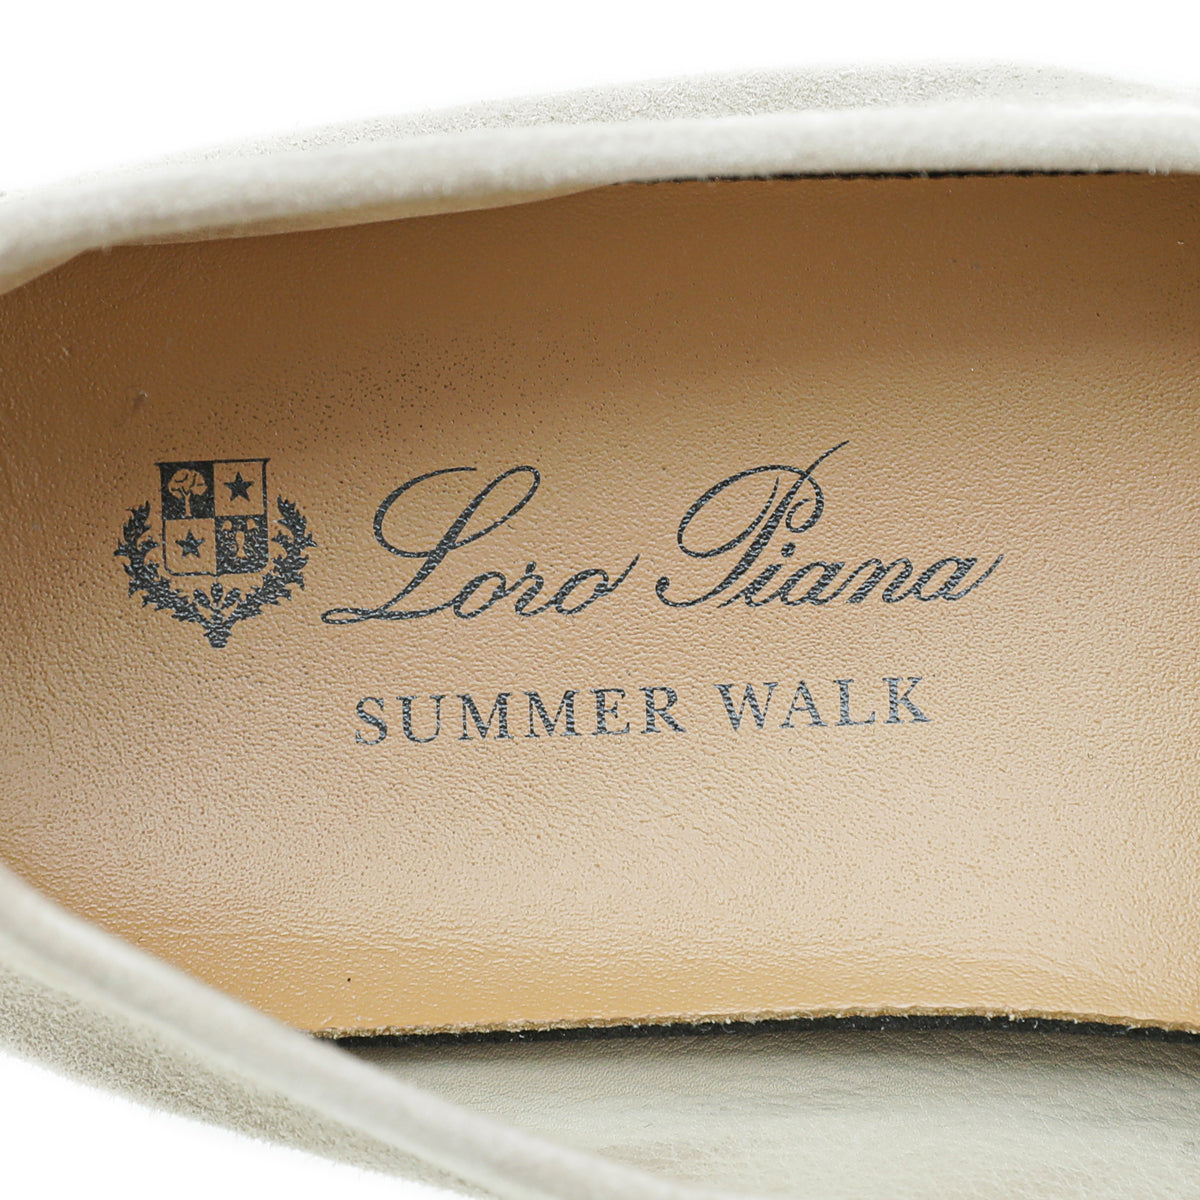 Loro Piana Powder Pearl Summer Charms Moccasin Loafer 38